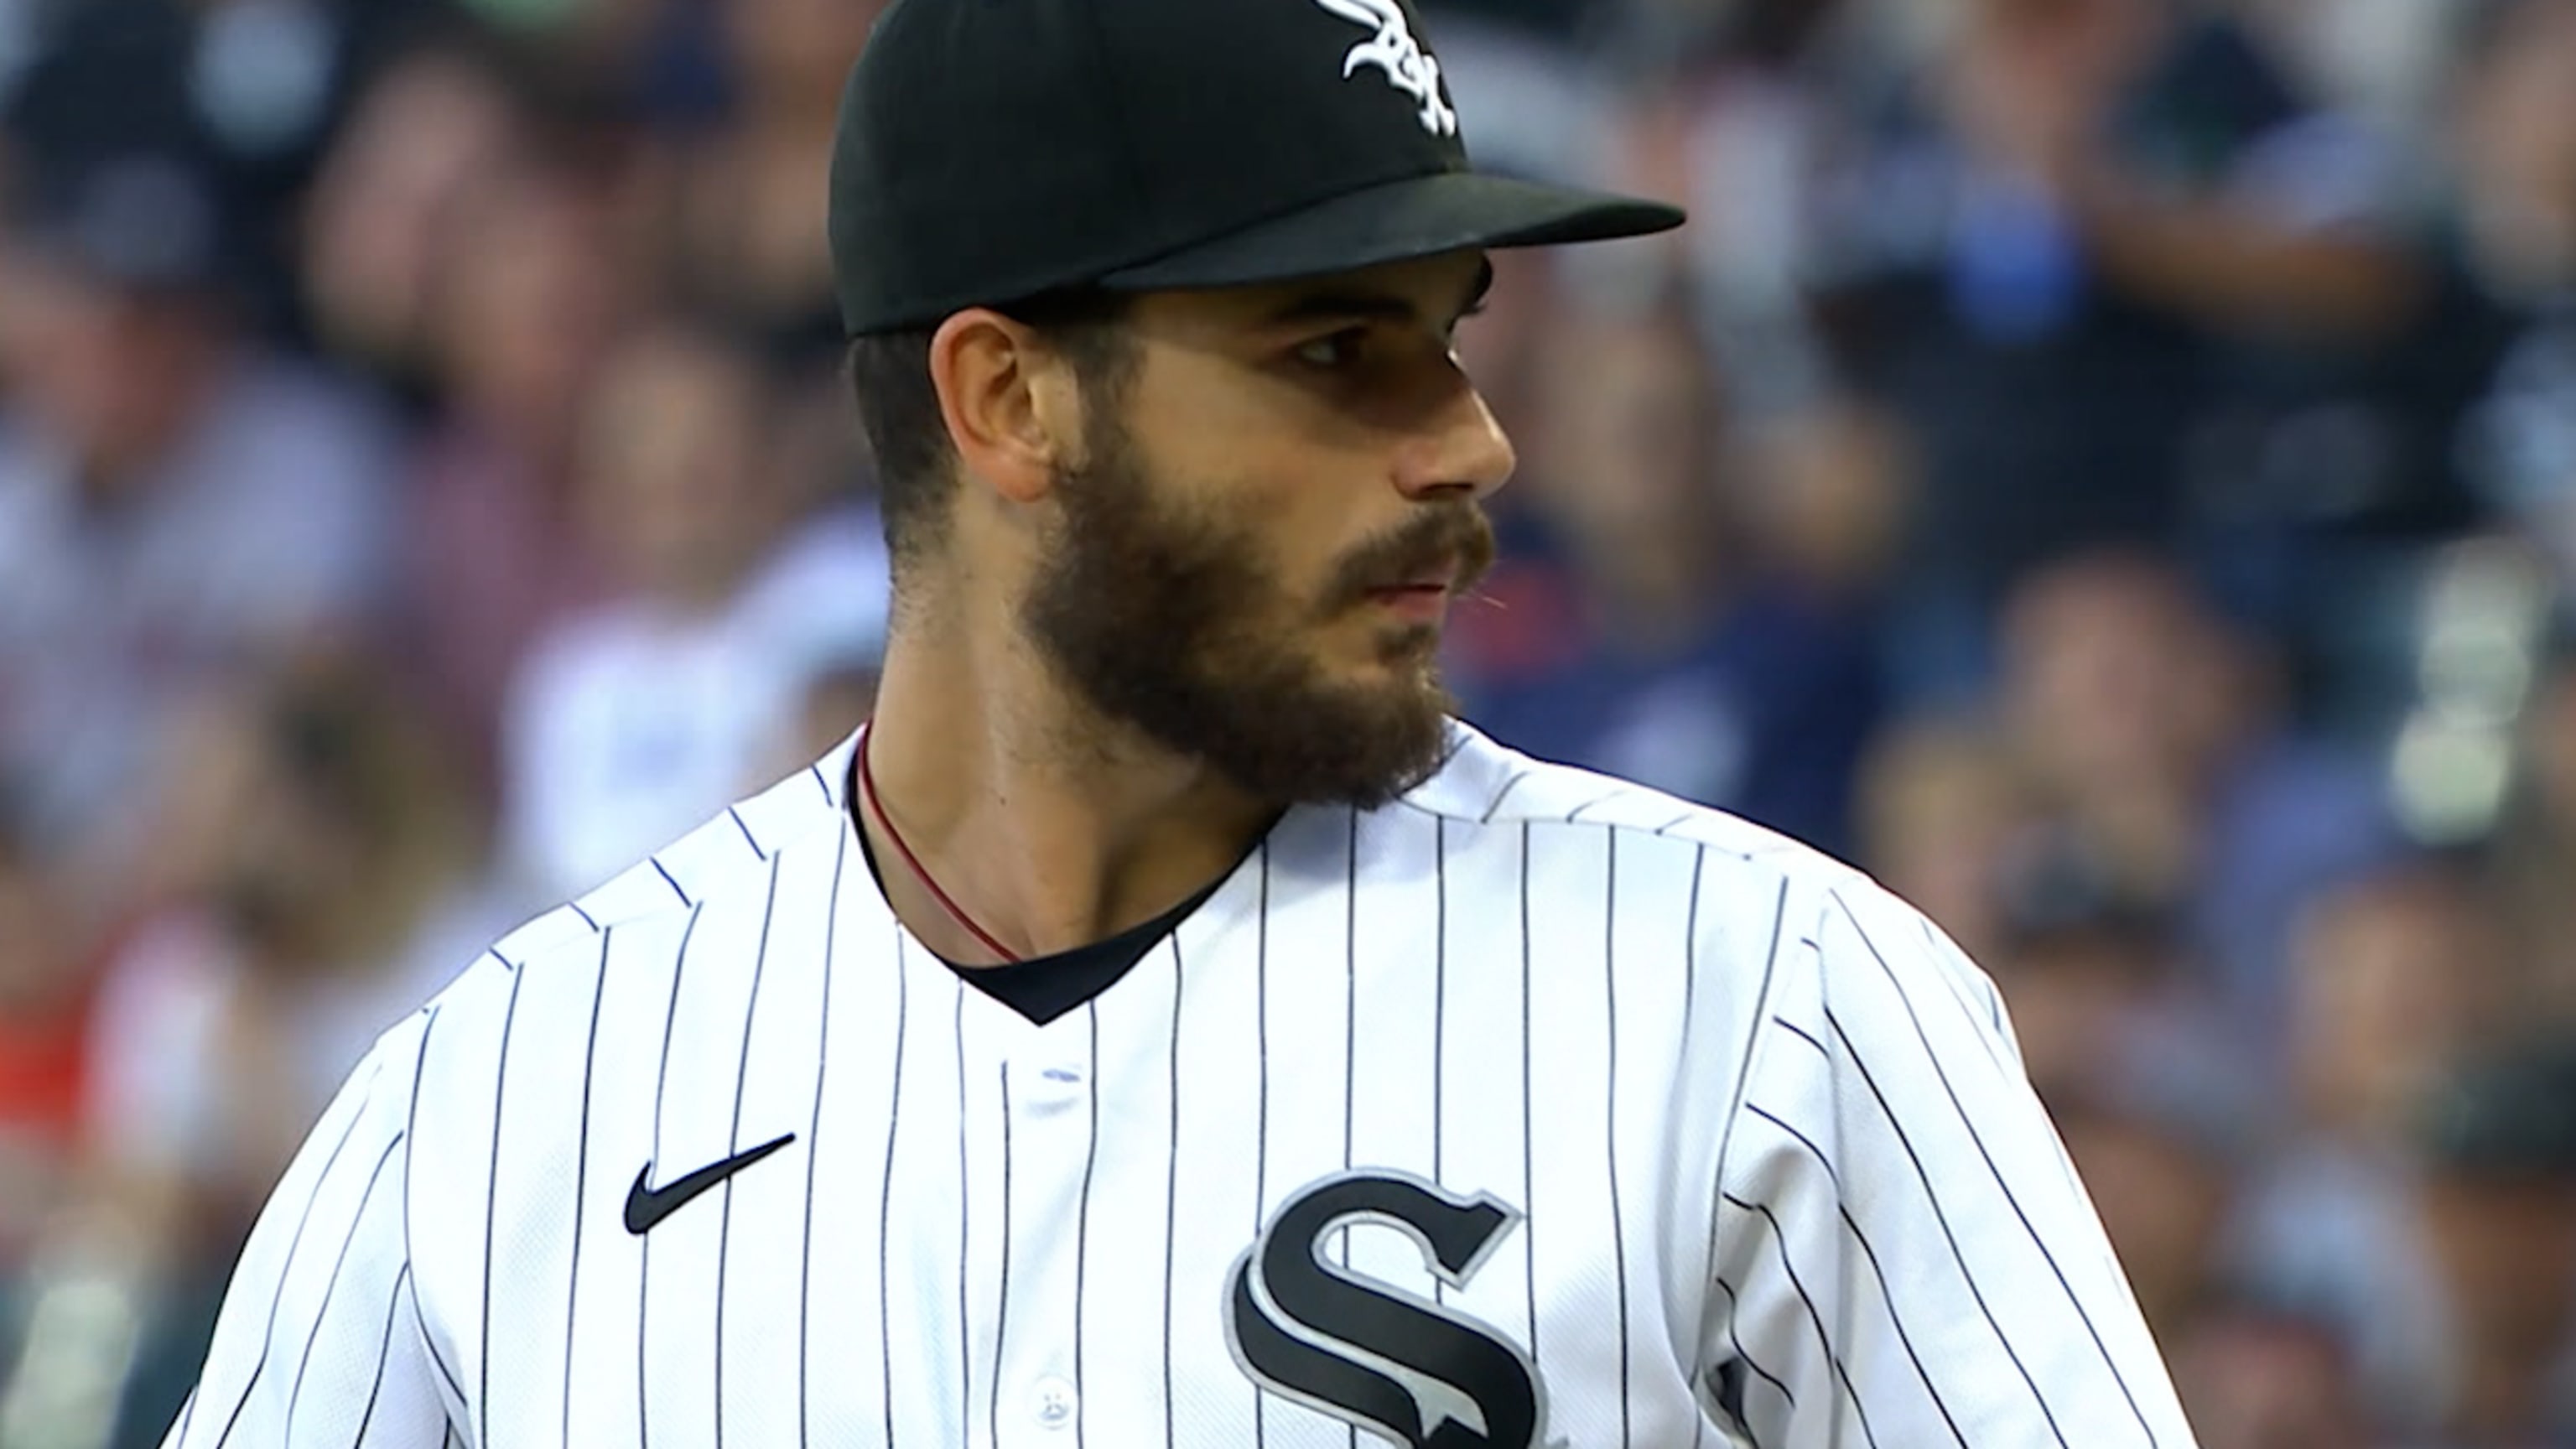 Dylan Cease poncha a Joey Gallo